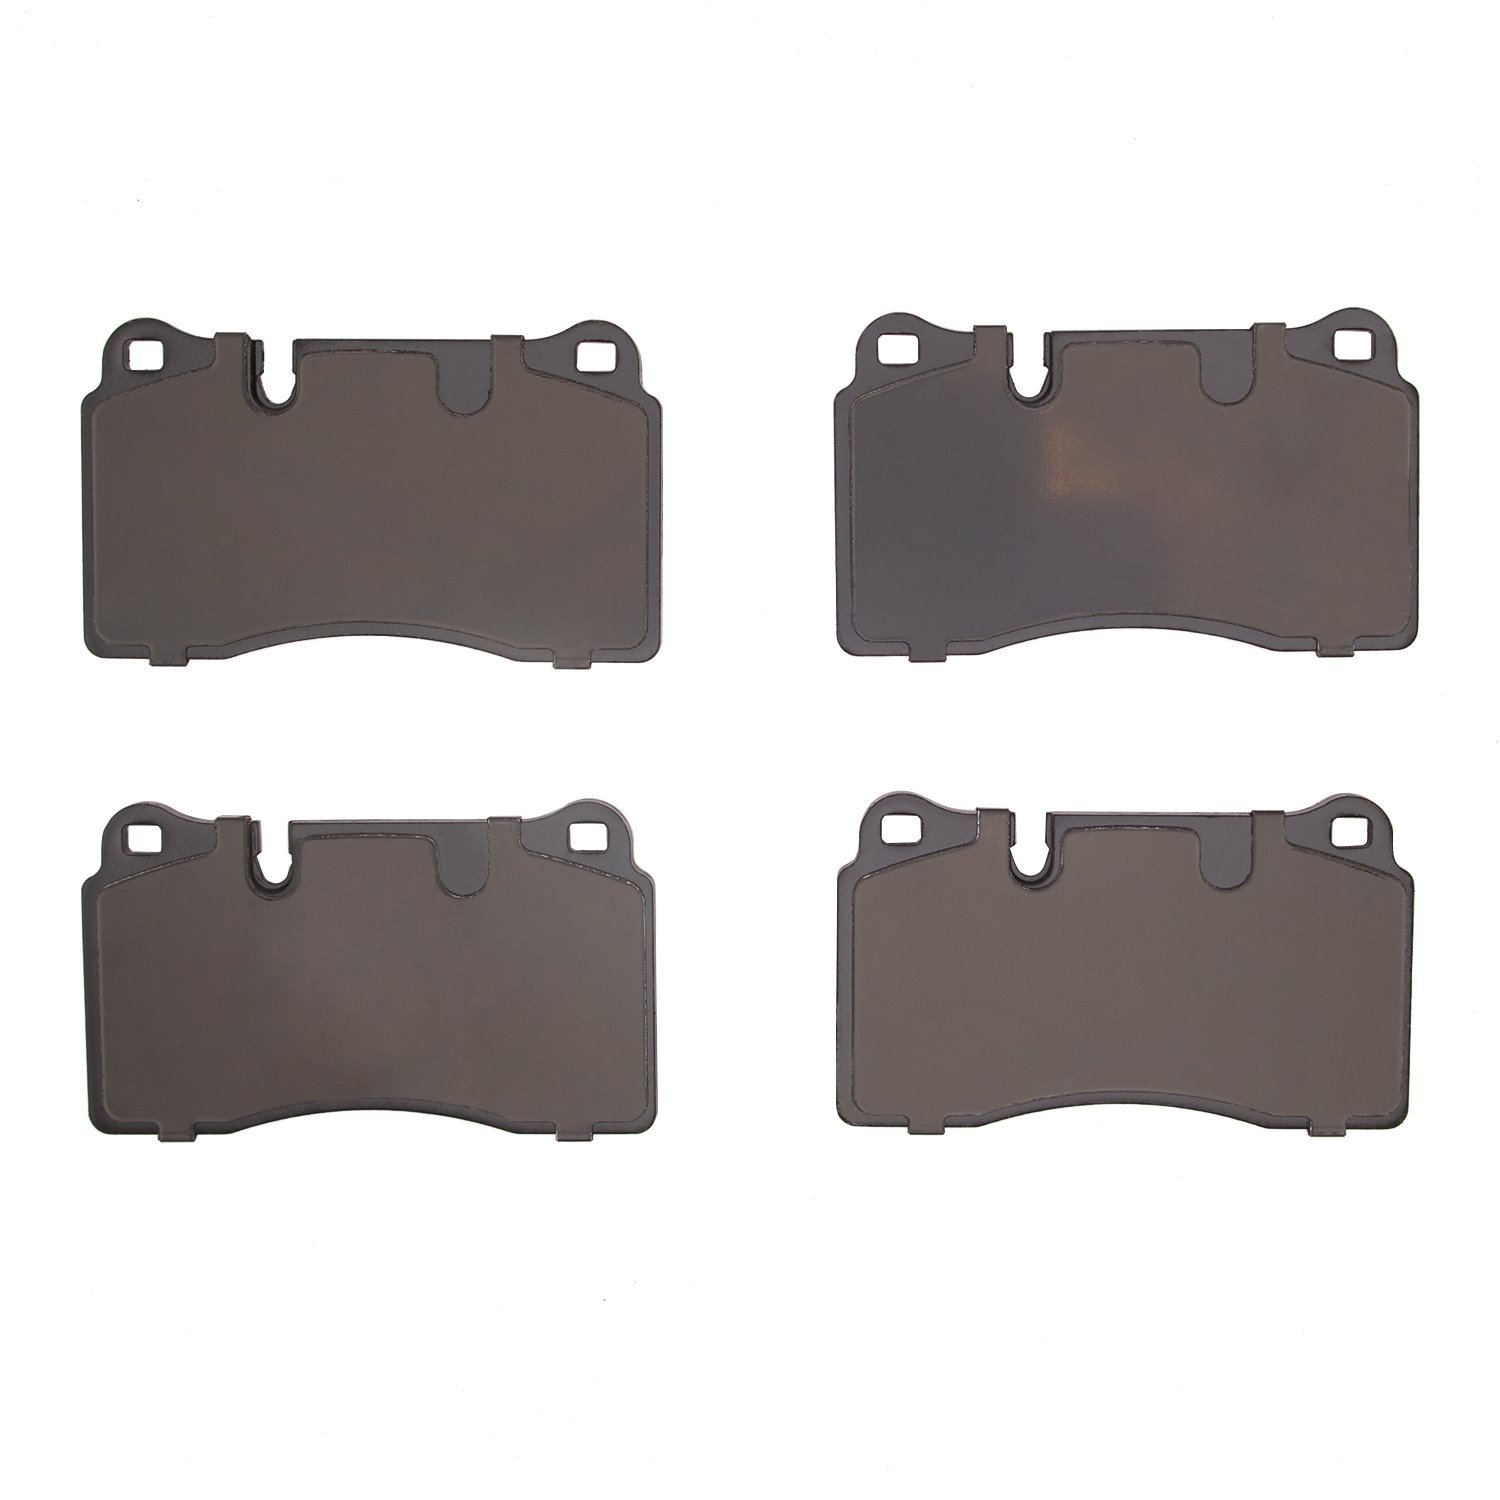 1600-1263-00 5000 Euro Ceramic Brake Pads, 2006-2009 Land Rover, Position: Front